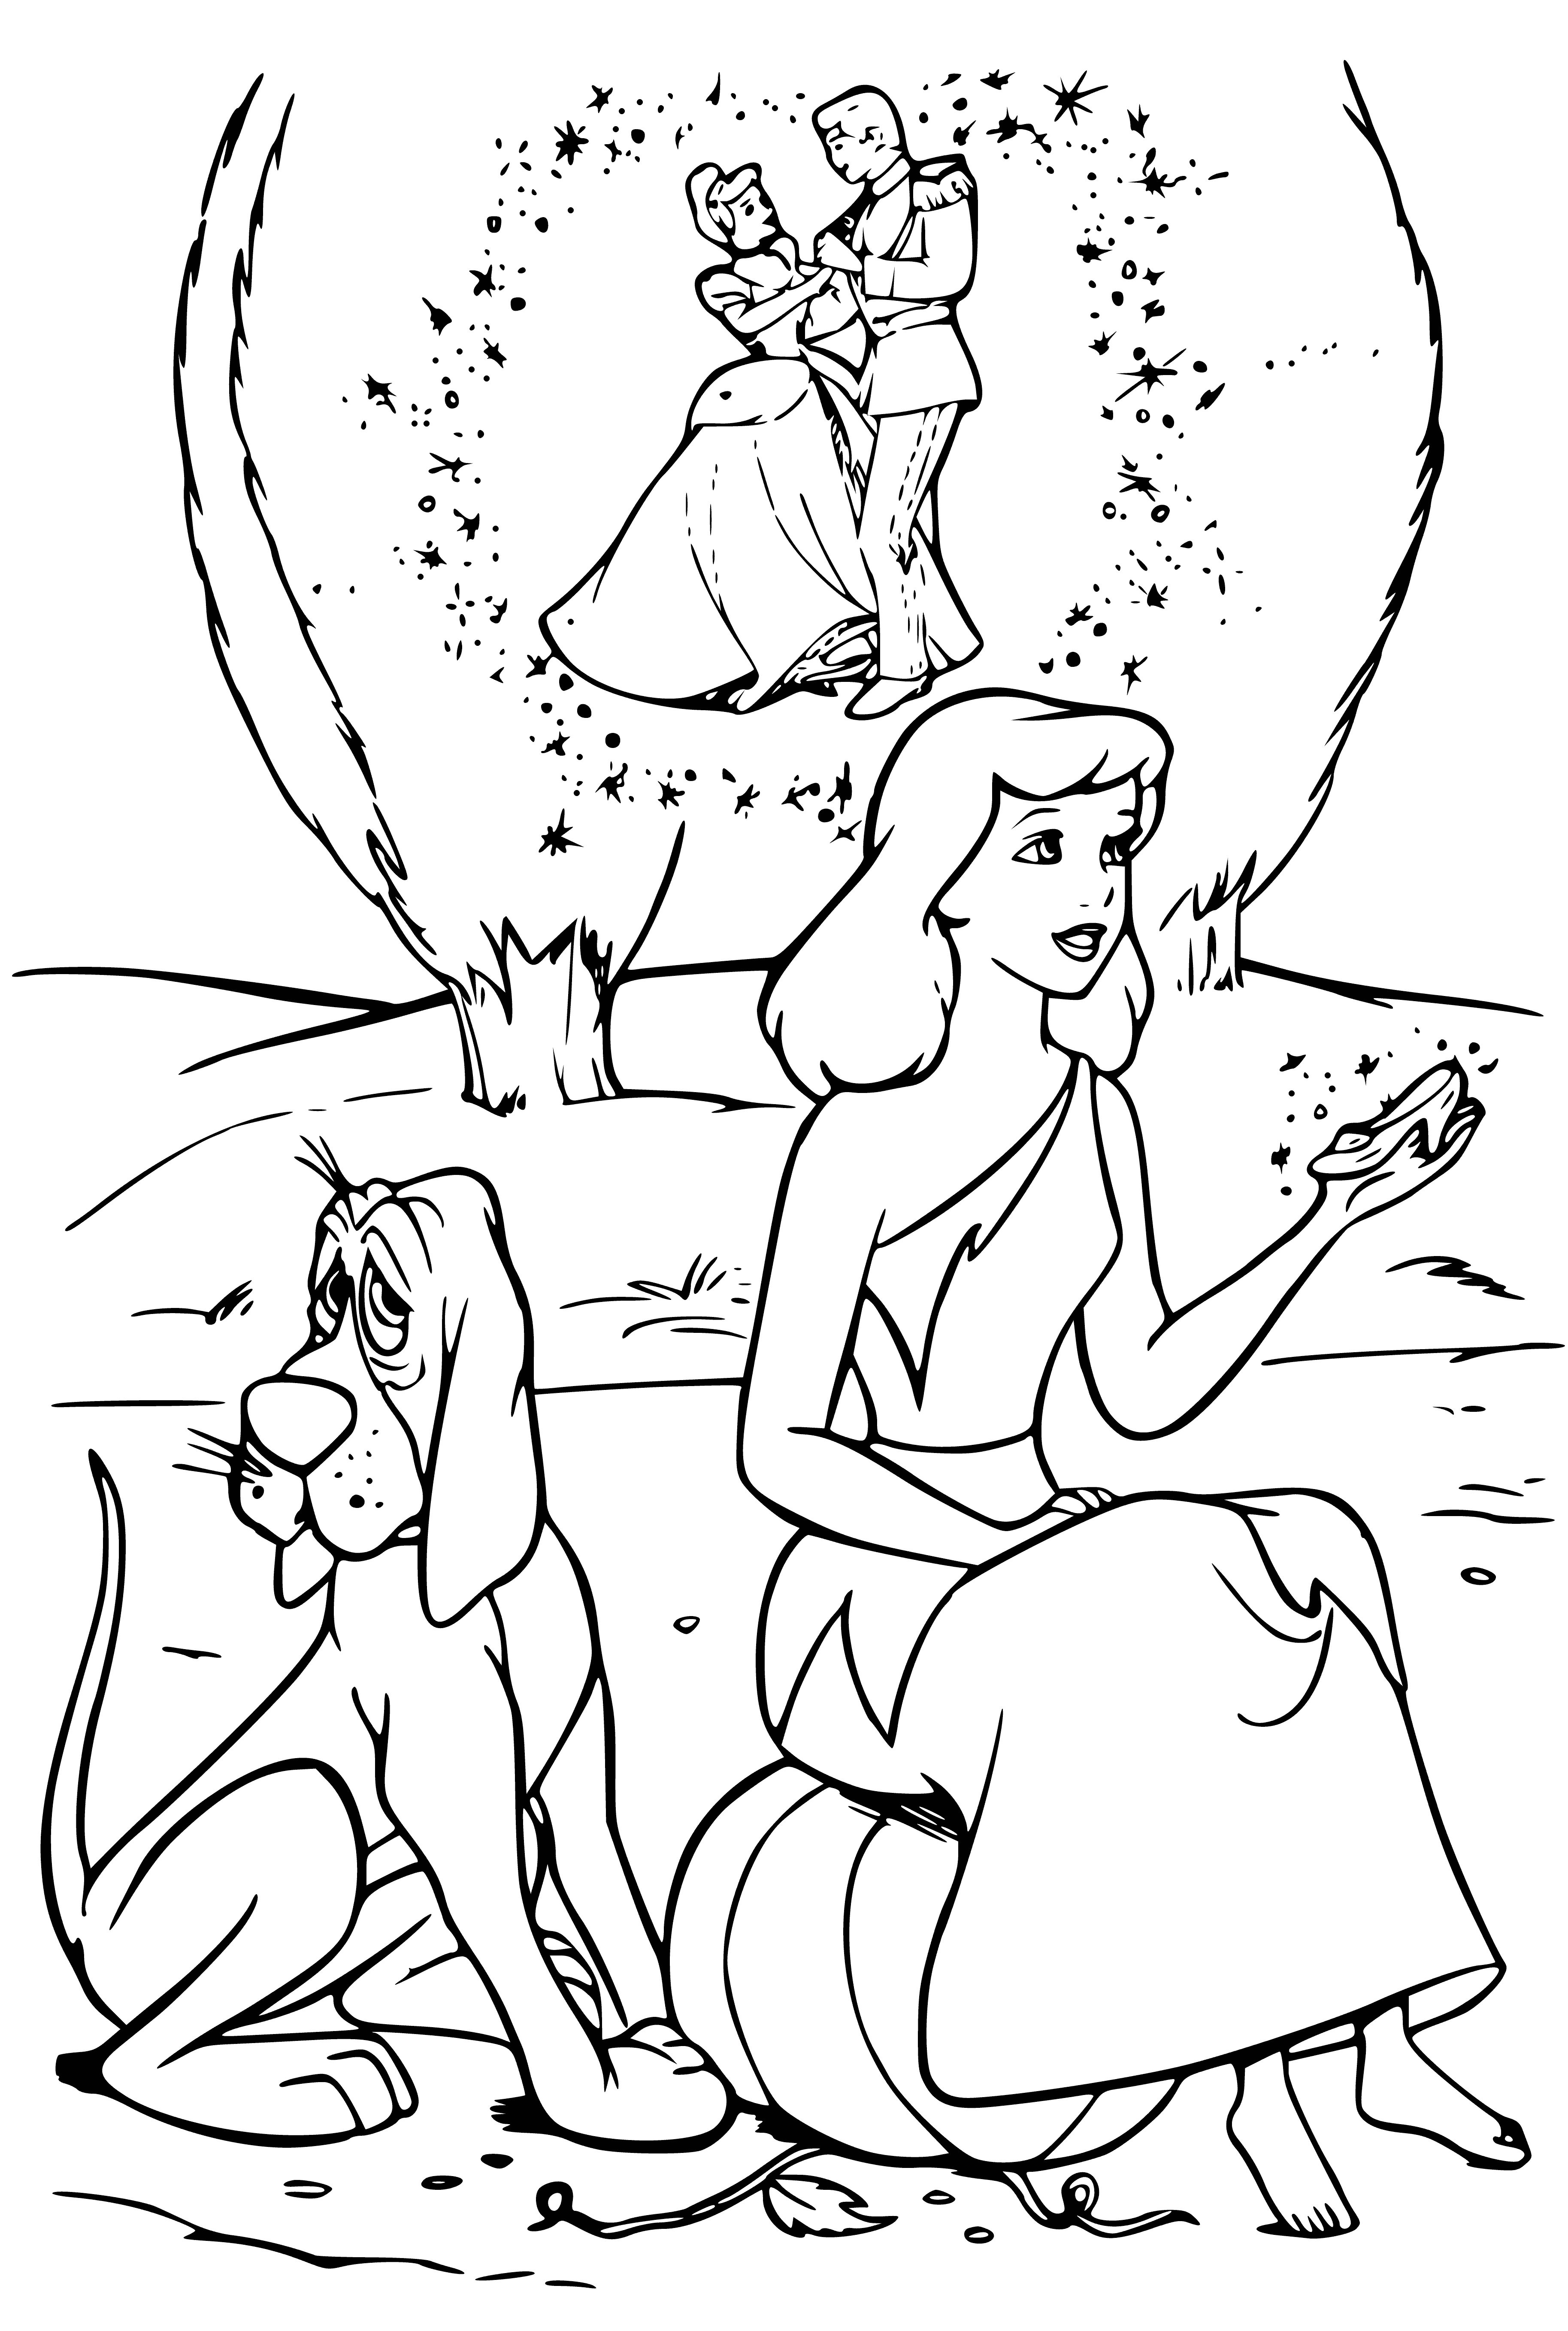 coloring page: --> Young girl admires her appearance in the mirror, excited in beautiful dress and styled hair.